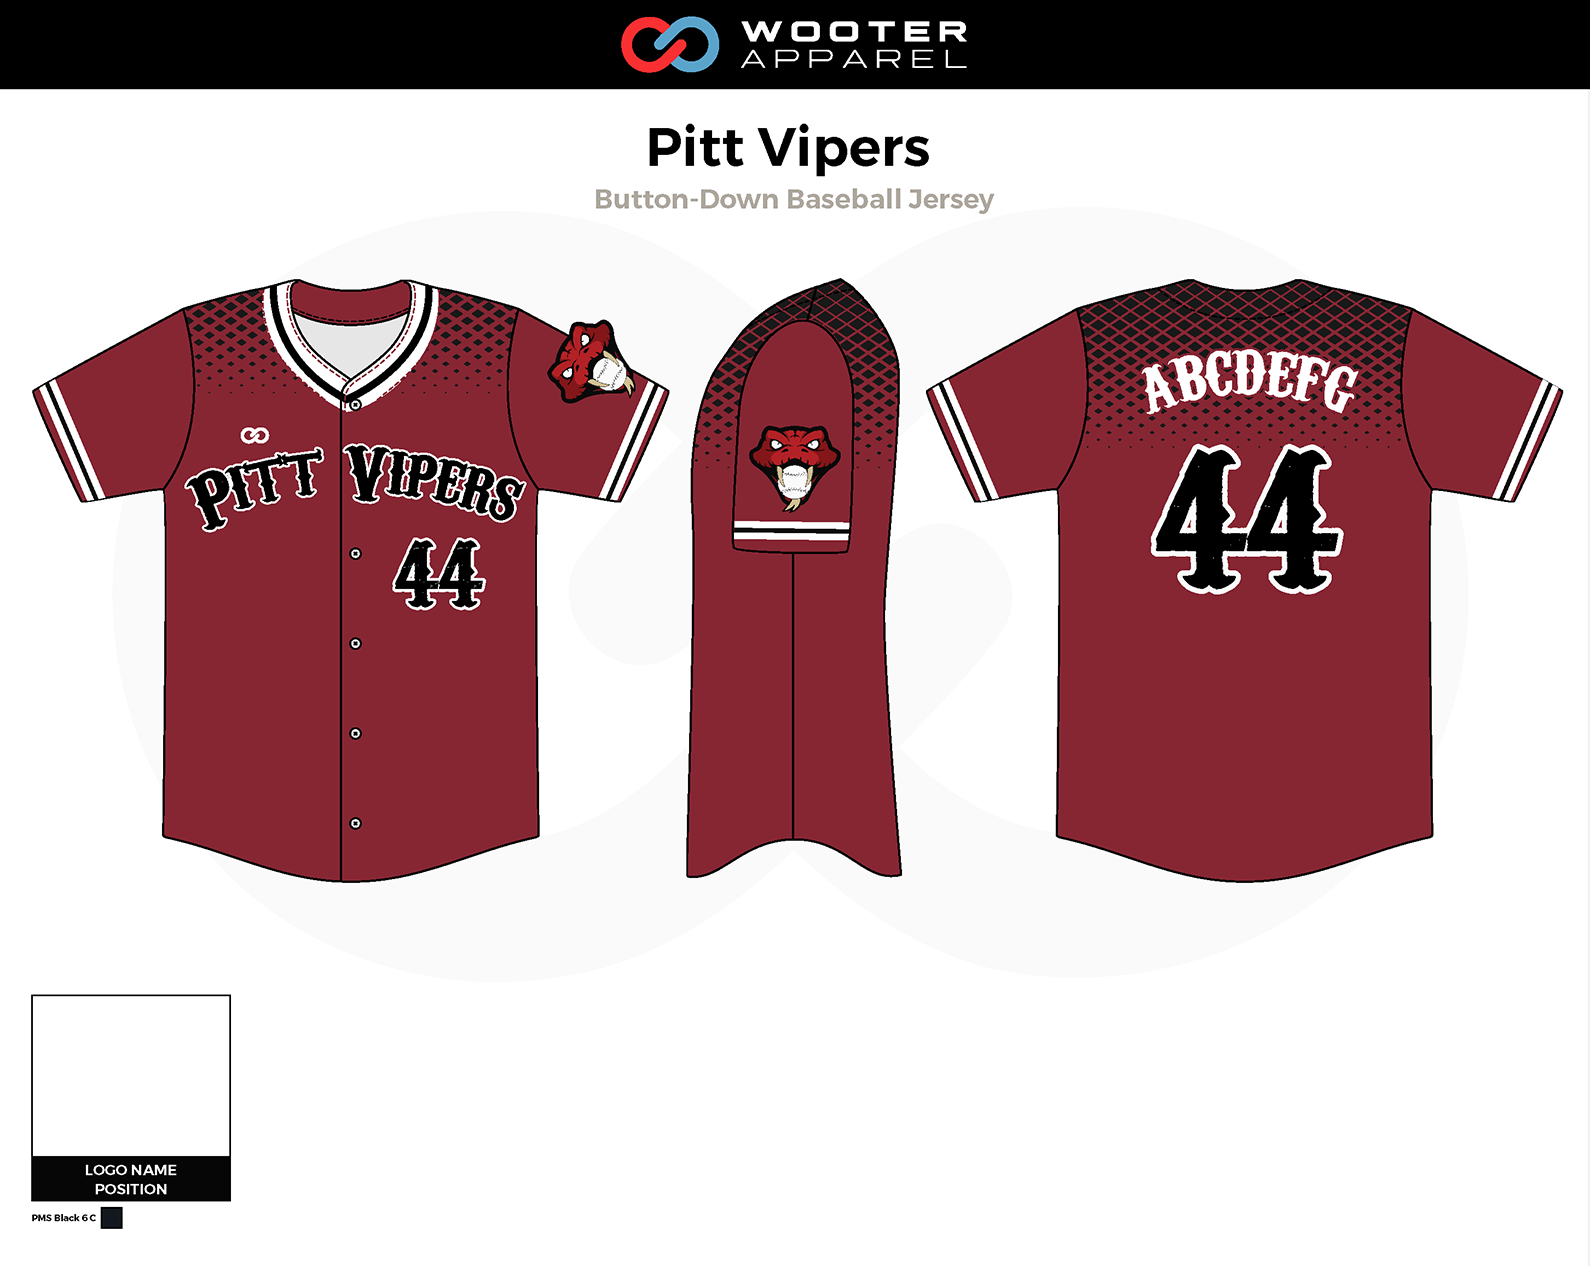 pitt vipers_Page_7.png